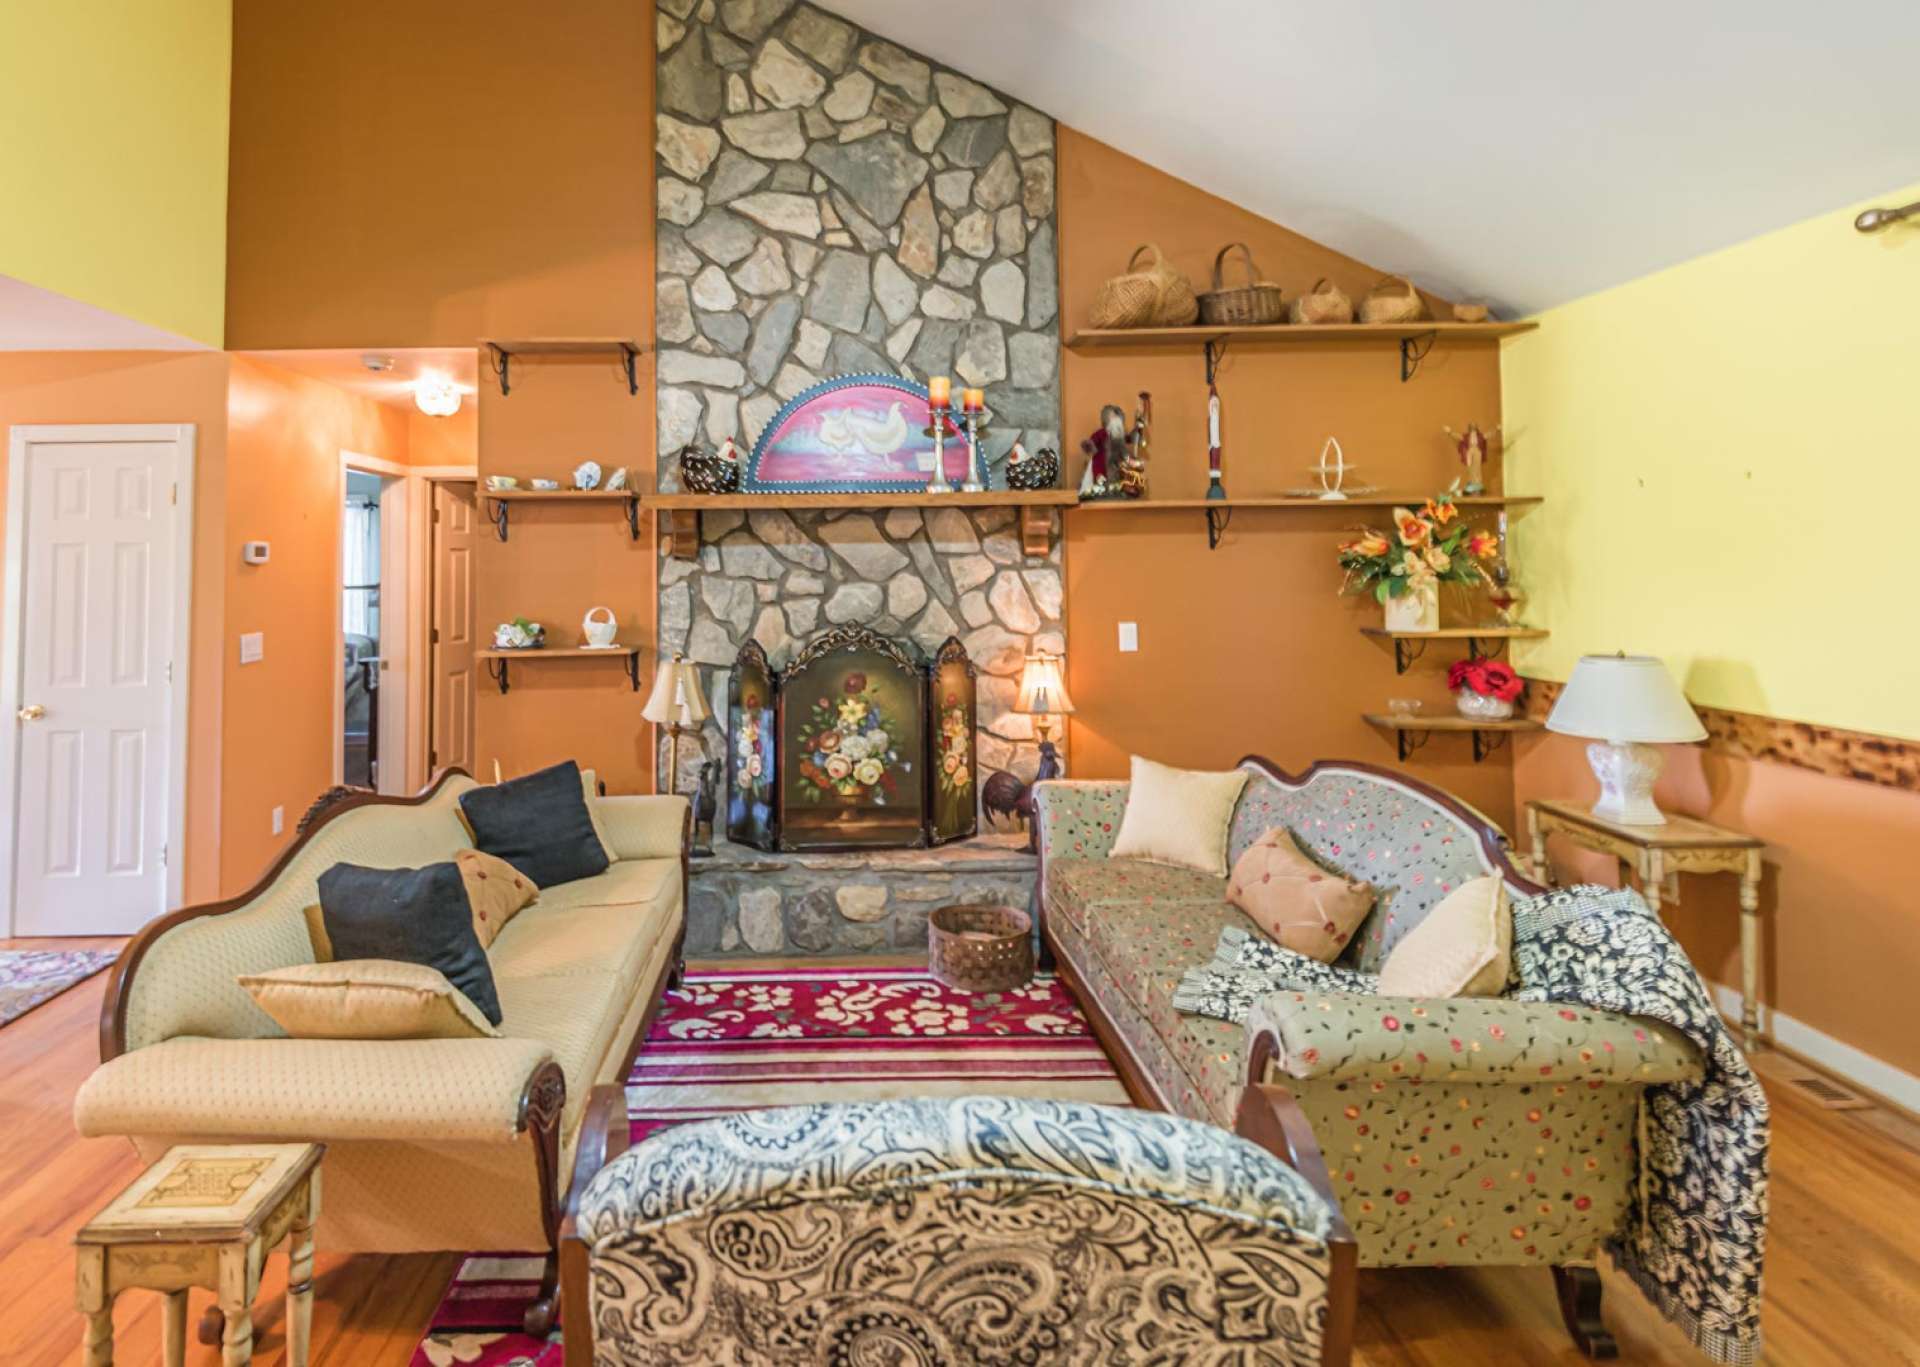 Offering one level living and an open floor plan, the great room is bright and cheery with vaulted ceiling, wood floors and a stone fireplace with gas logs.